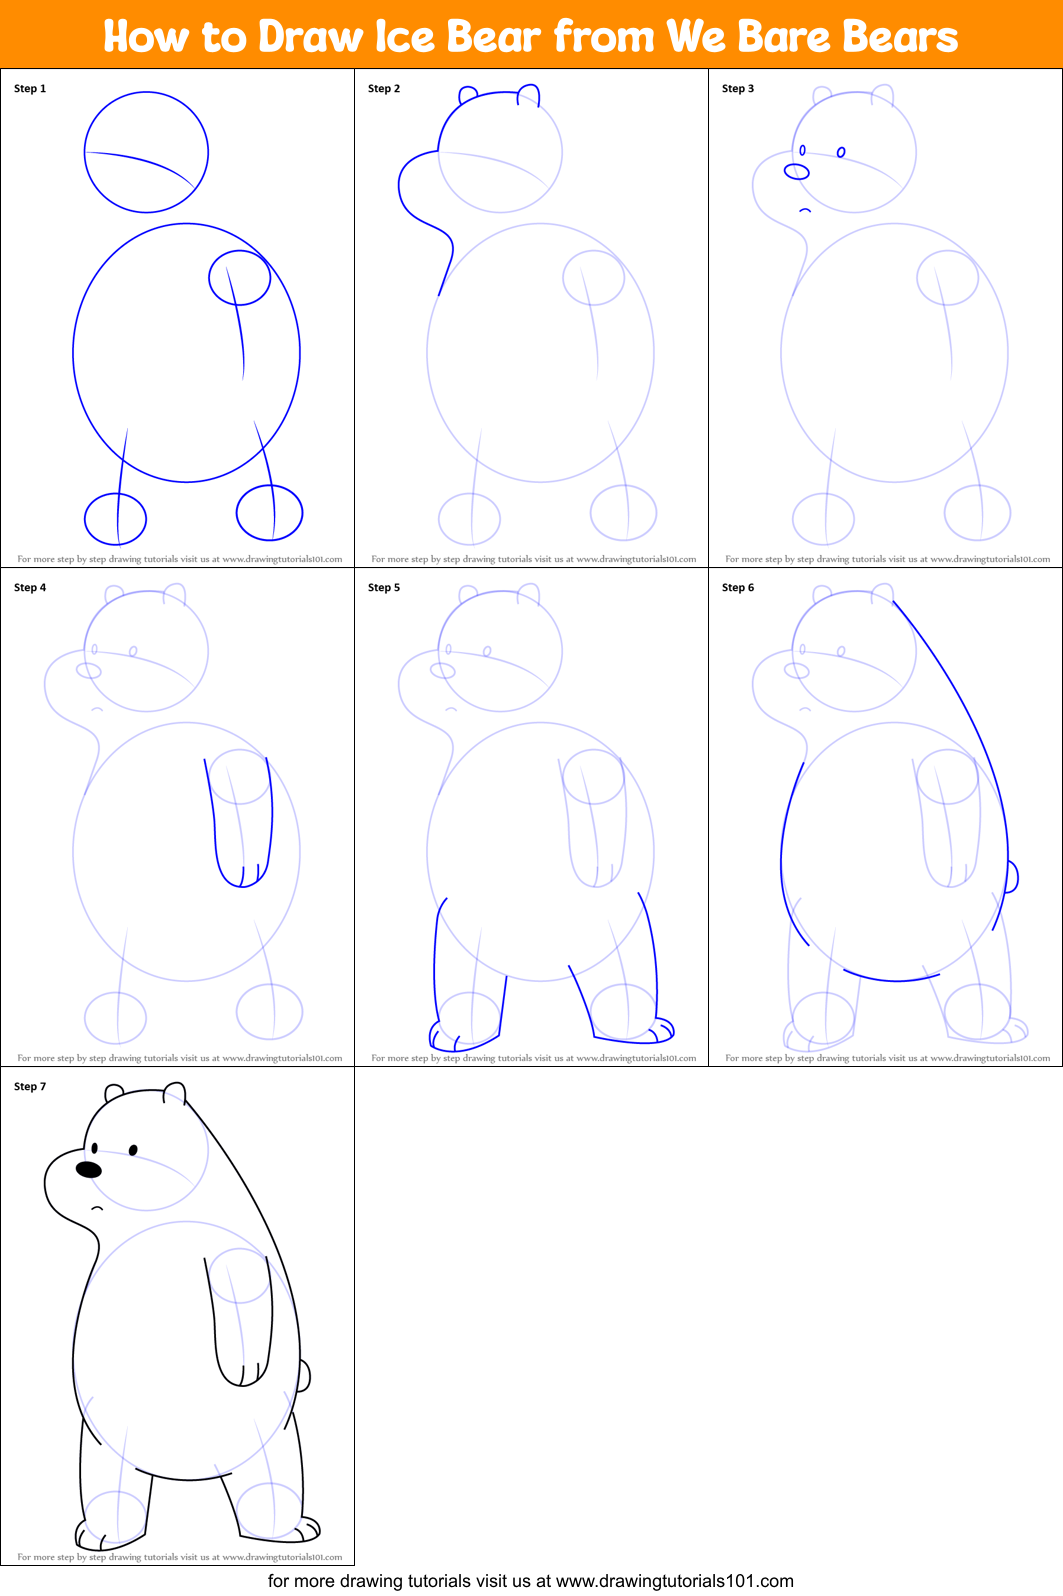 How To Draw Ice Bear From We Bare Bears Printable Step By Step Drawing Sheet Drawingtutorials101 Com